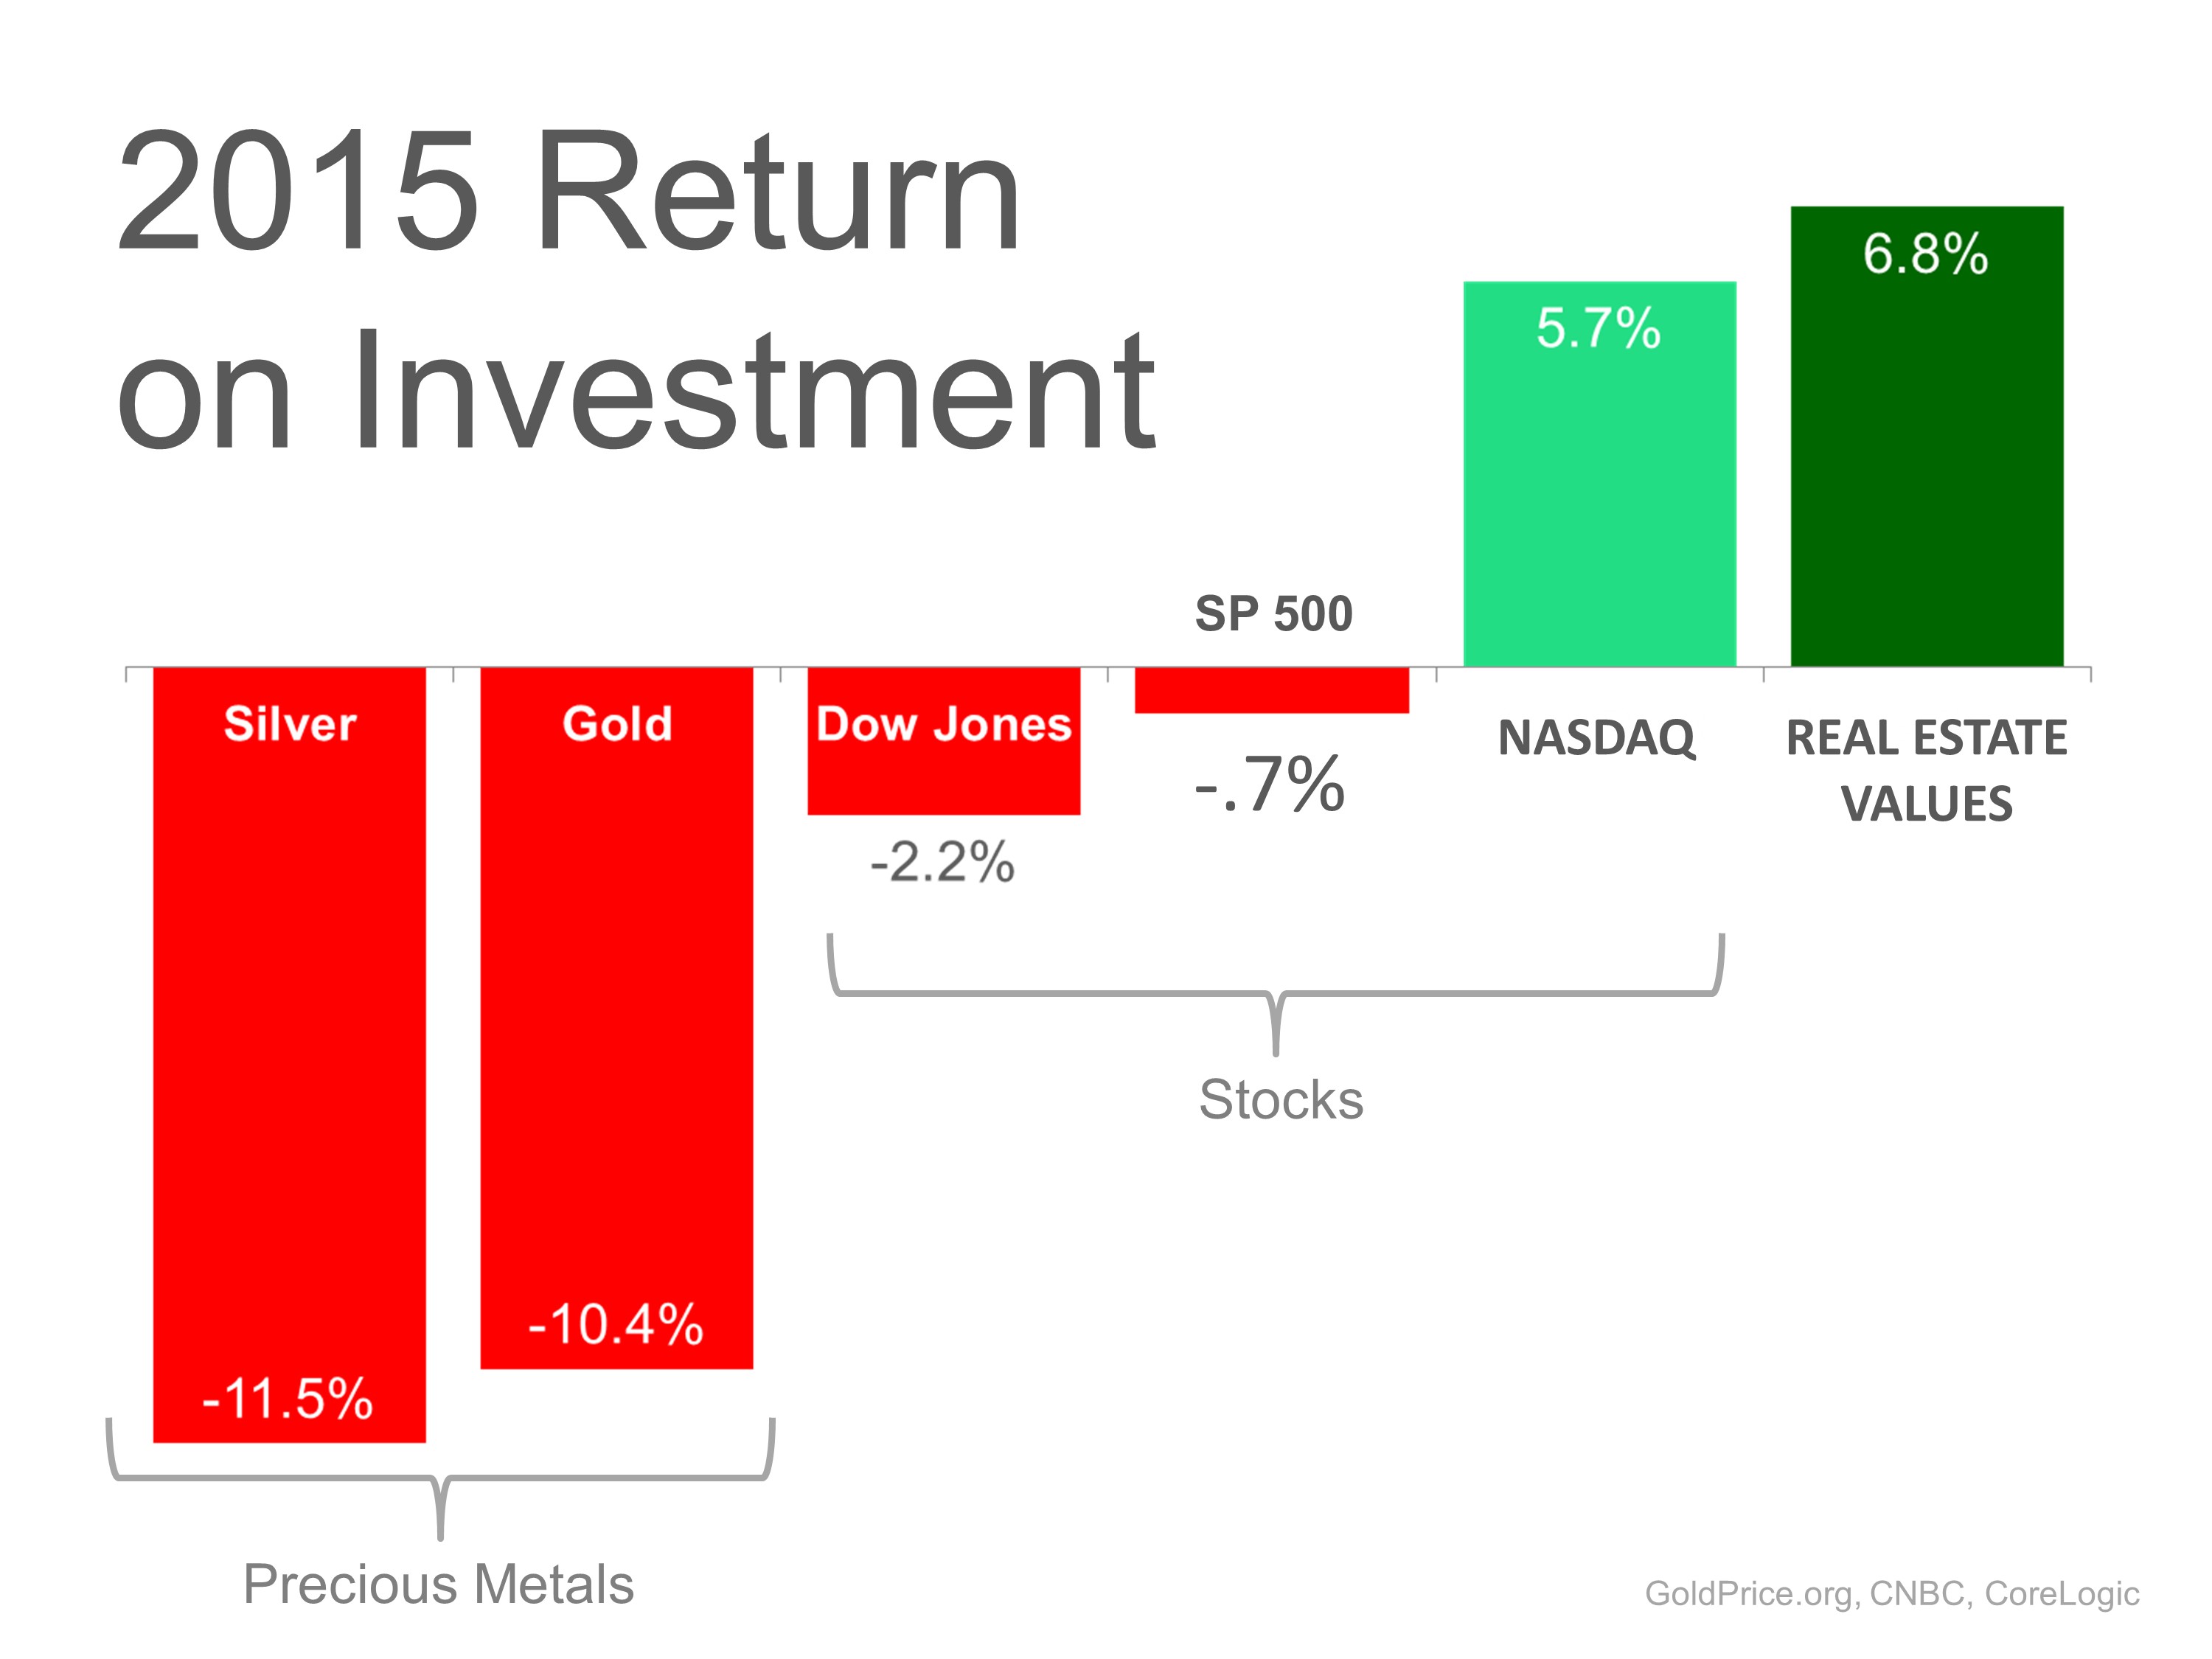 2015 return on investment show real estate the best